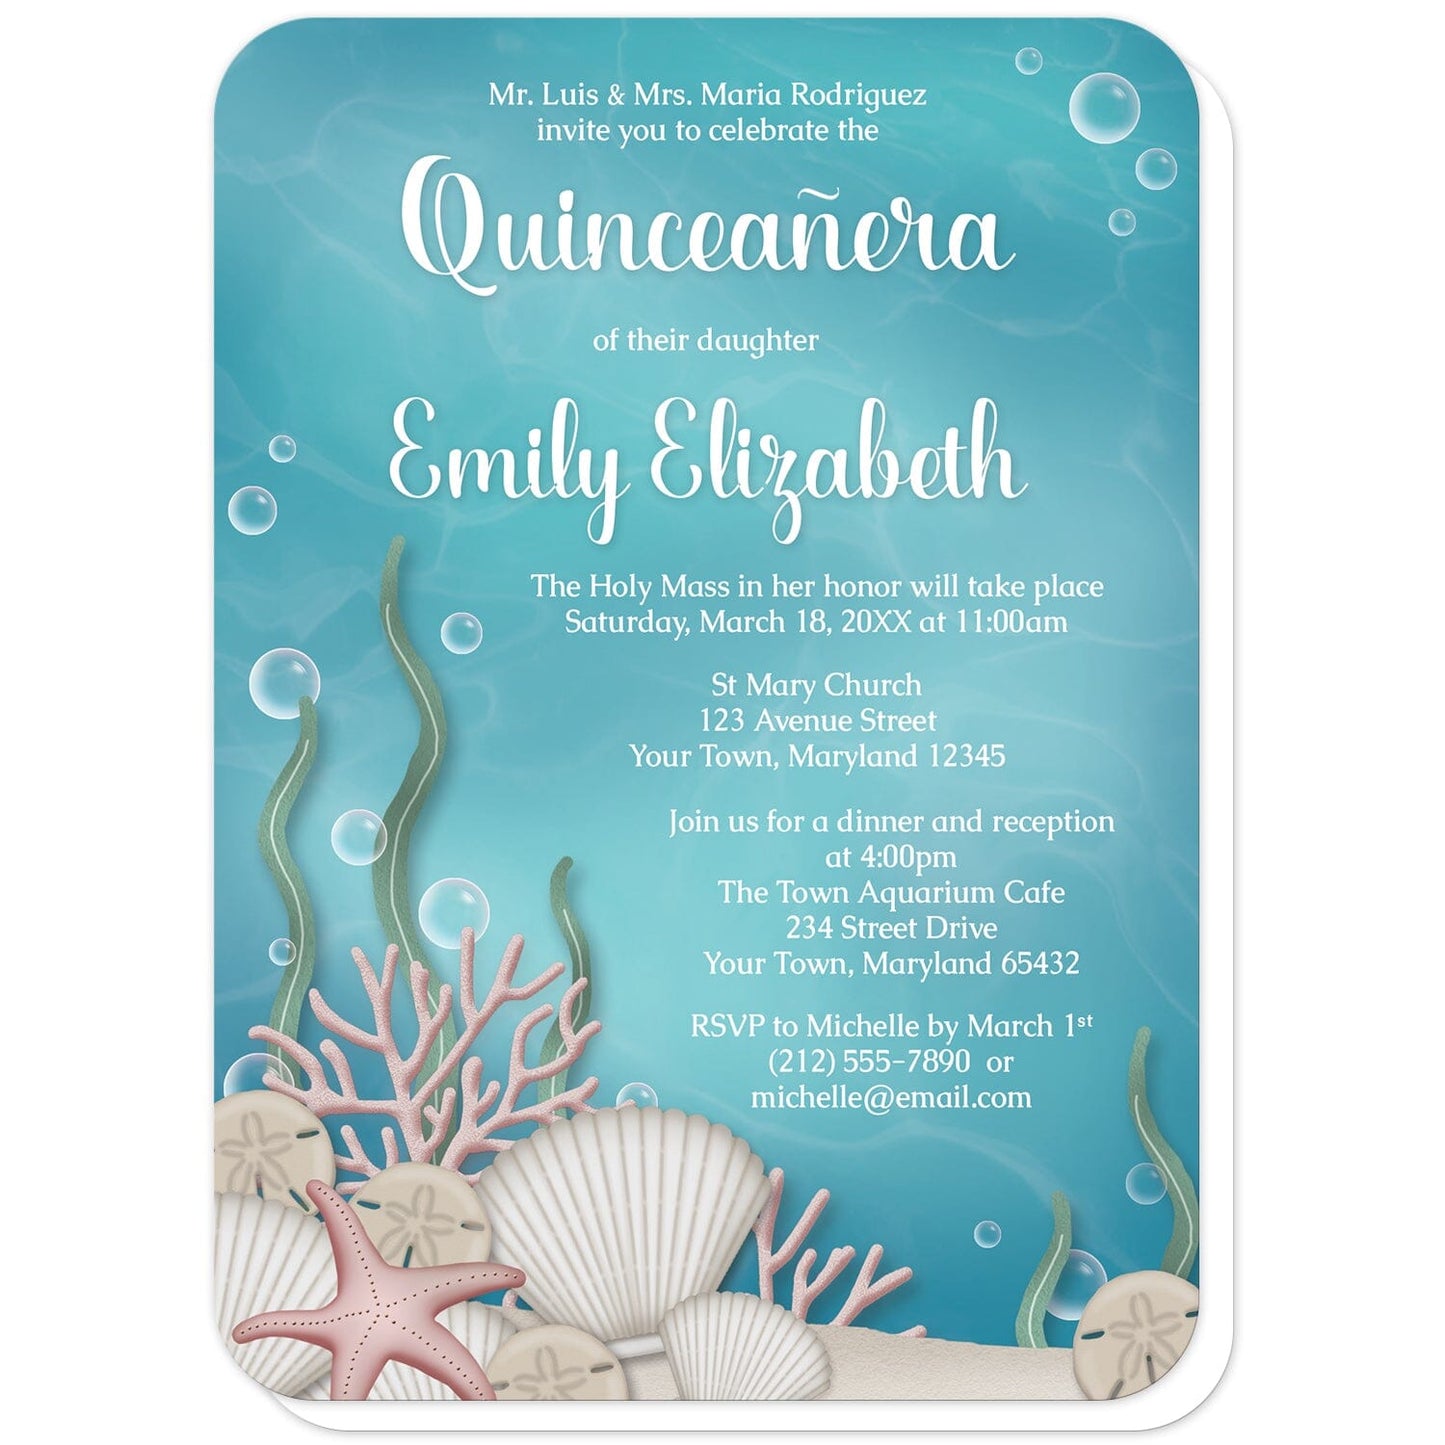 Whimsical Under the Sea Quinceañera Invitations (with rounded corners) at Artistically Invited. Beautifully illustrated whimsical under the sea Quinceañera invitations with an under the sea or aquarium theme. They are designed with a sandy seabed, assorted seashells, bubbles, coral, and kelp with an underwater aqua blue water background. Your personalized 15th birthday celebration details are custom printed in white over the water background.